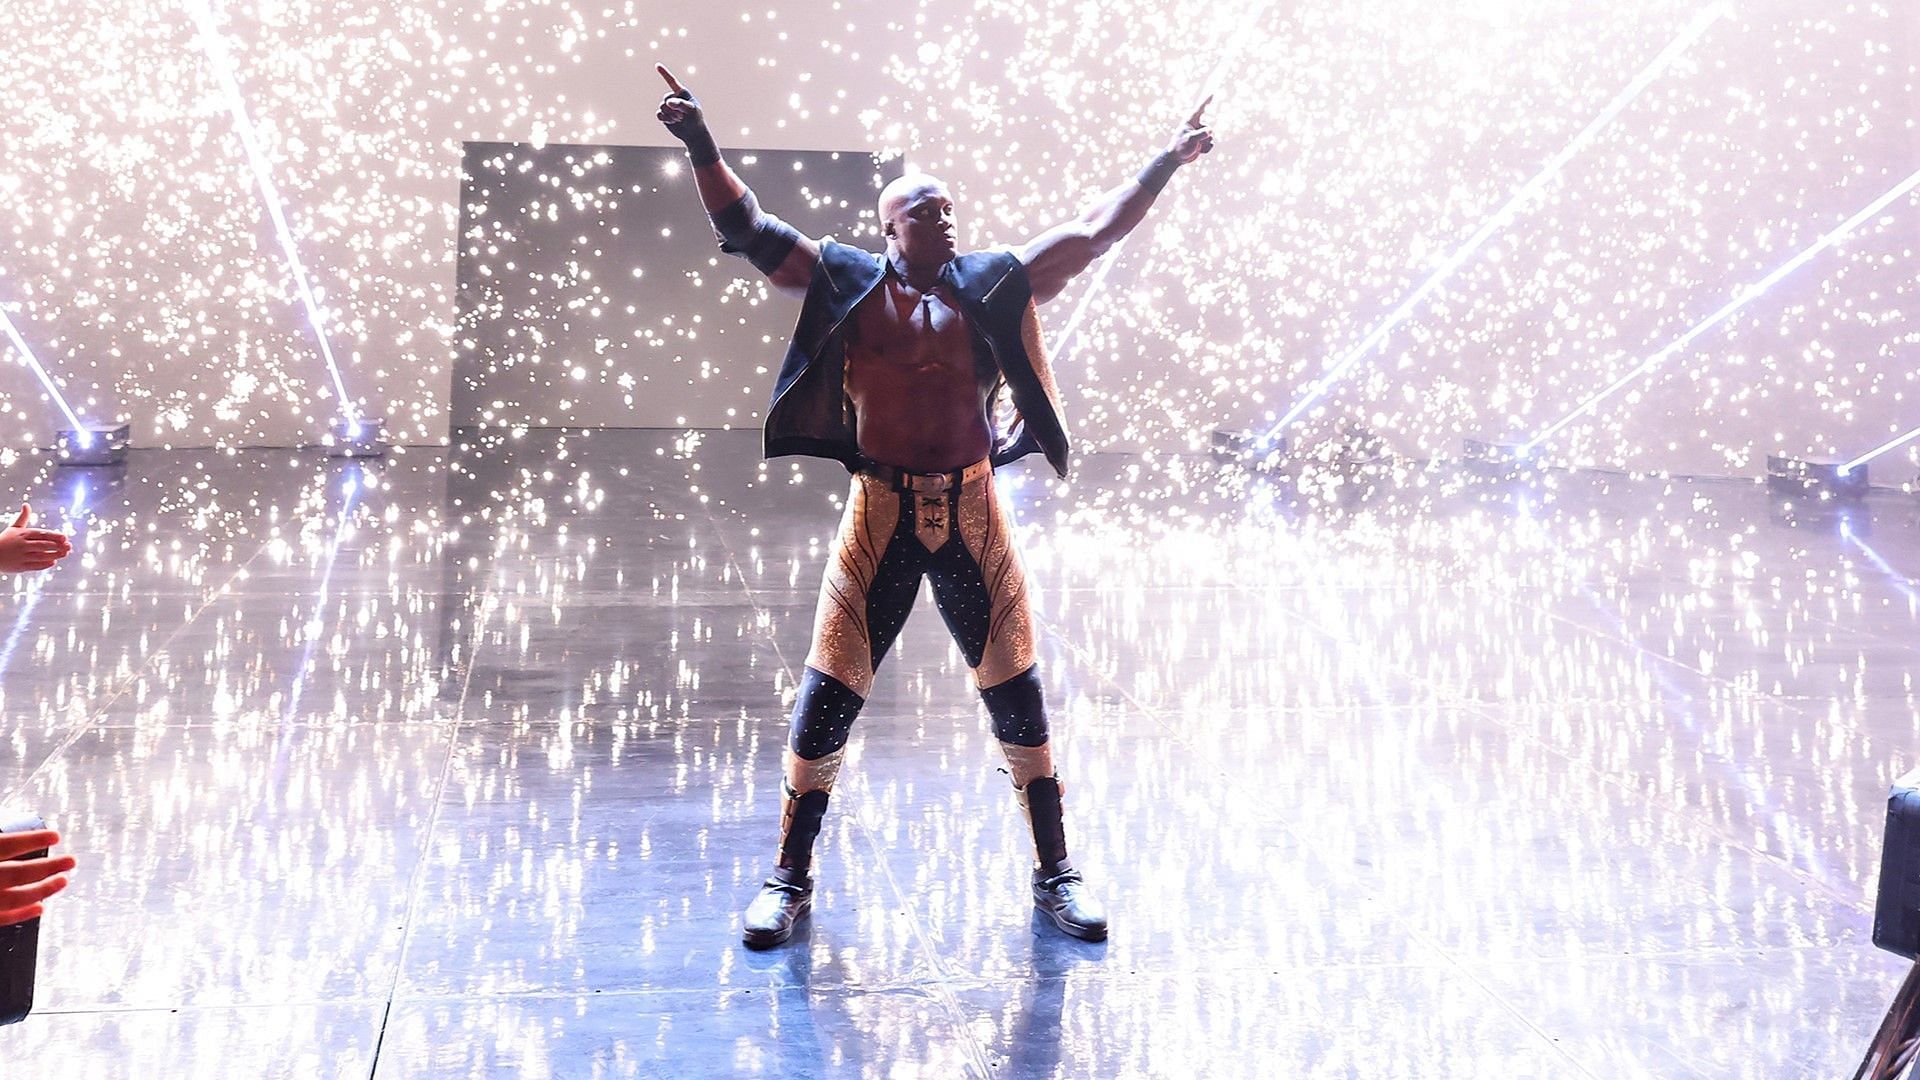 Bobby Lashley makes his entrance on WWE SmackDown